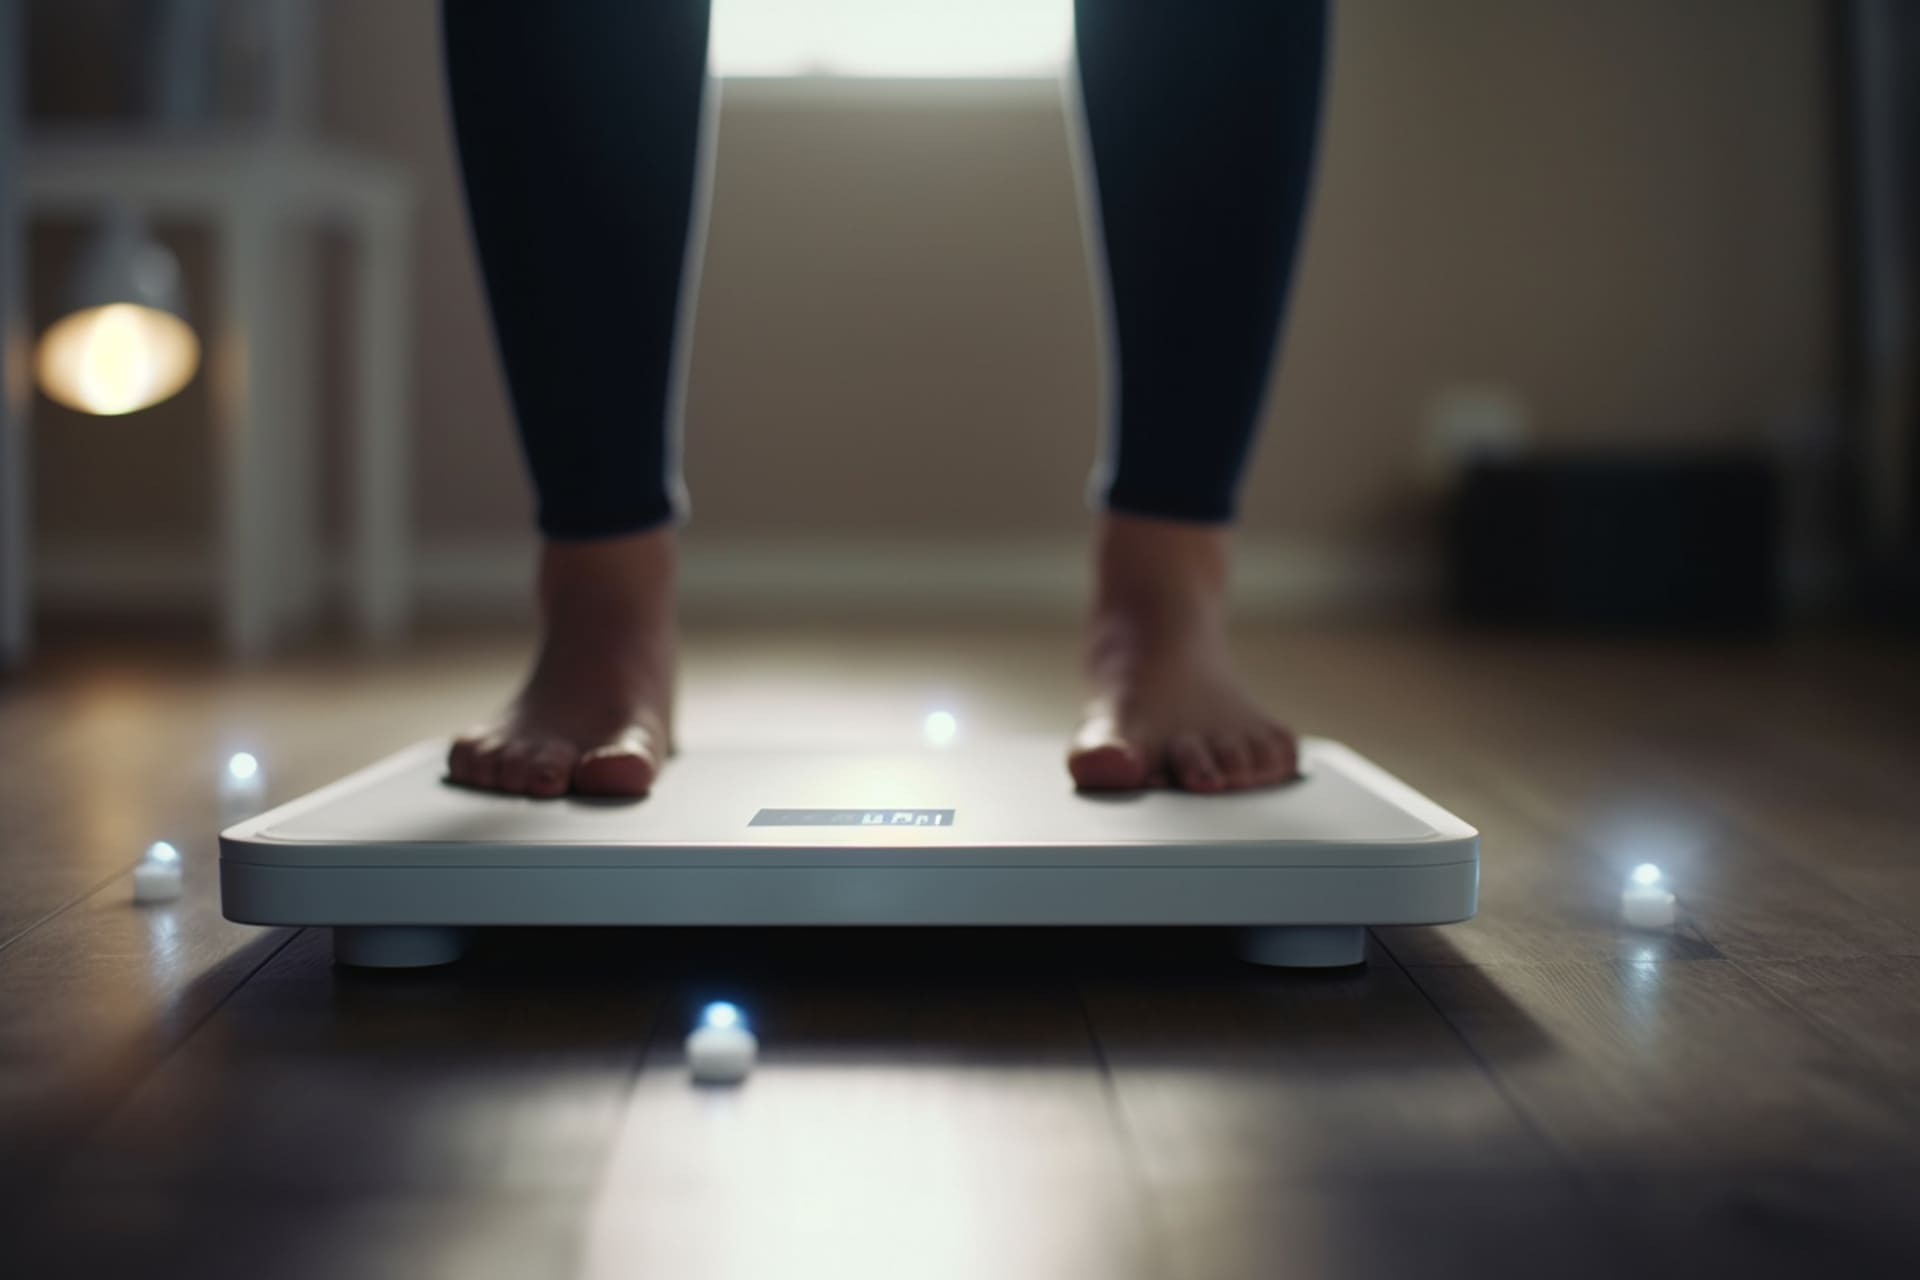 Getting Started With Your Bwell Smart Scale